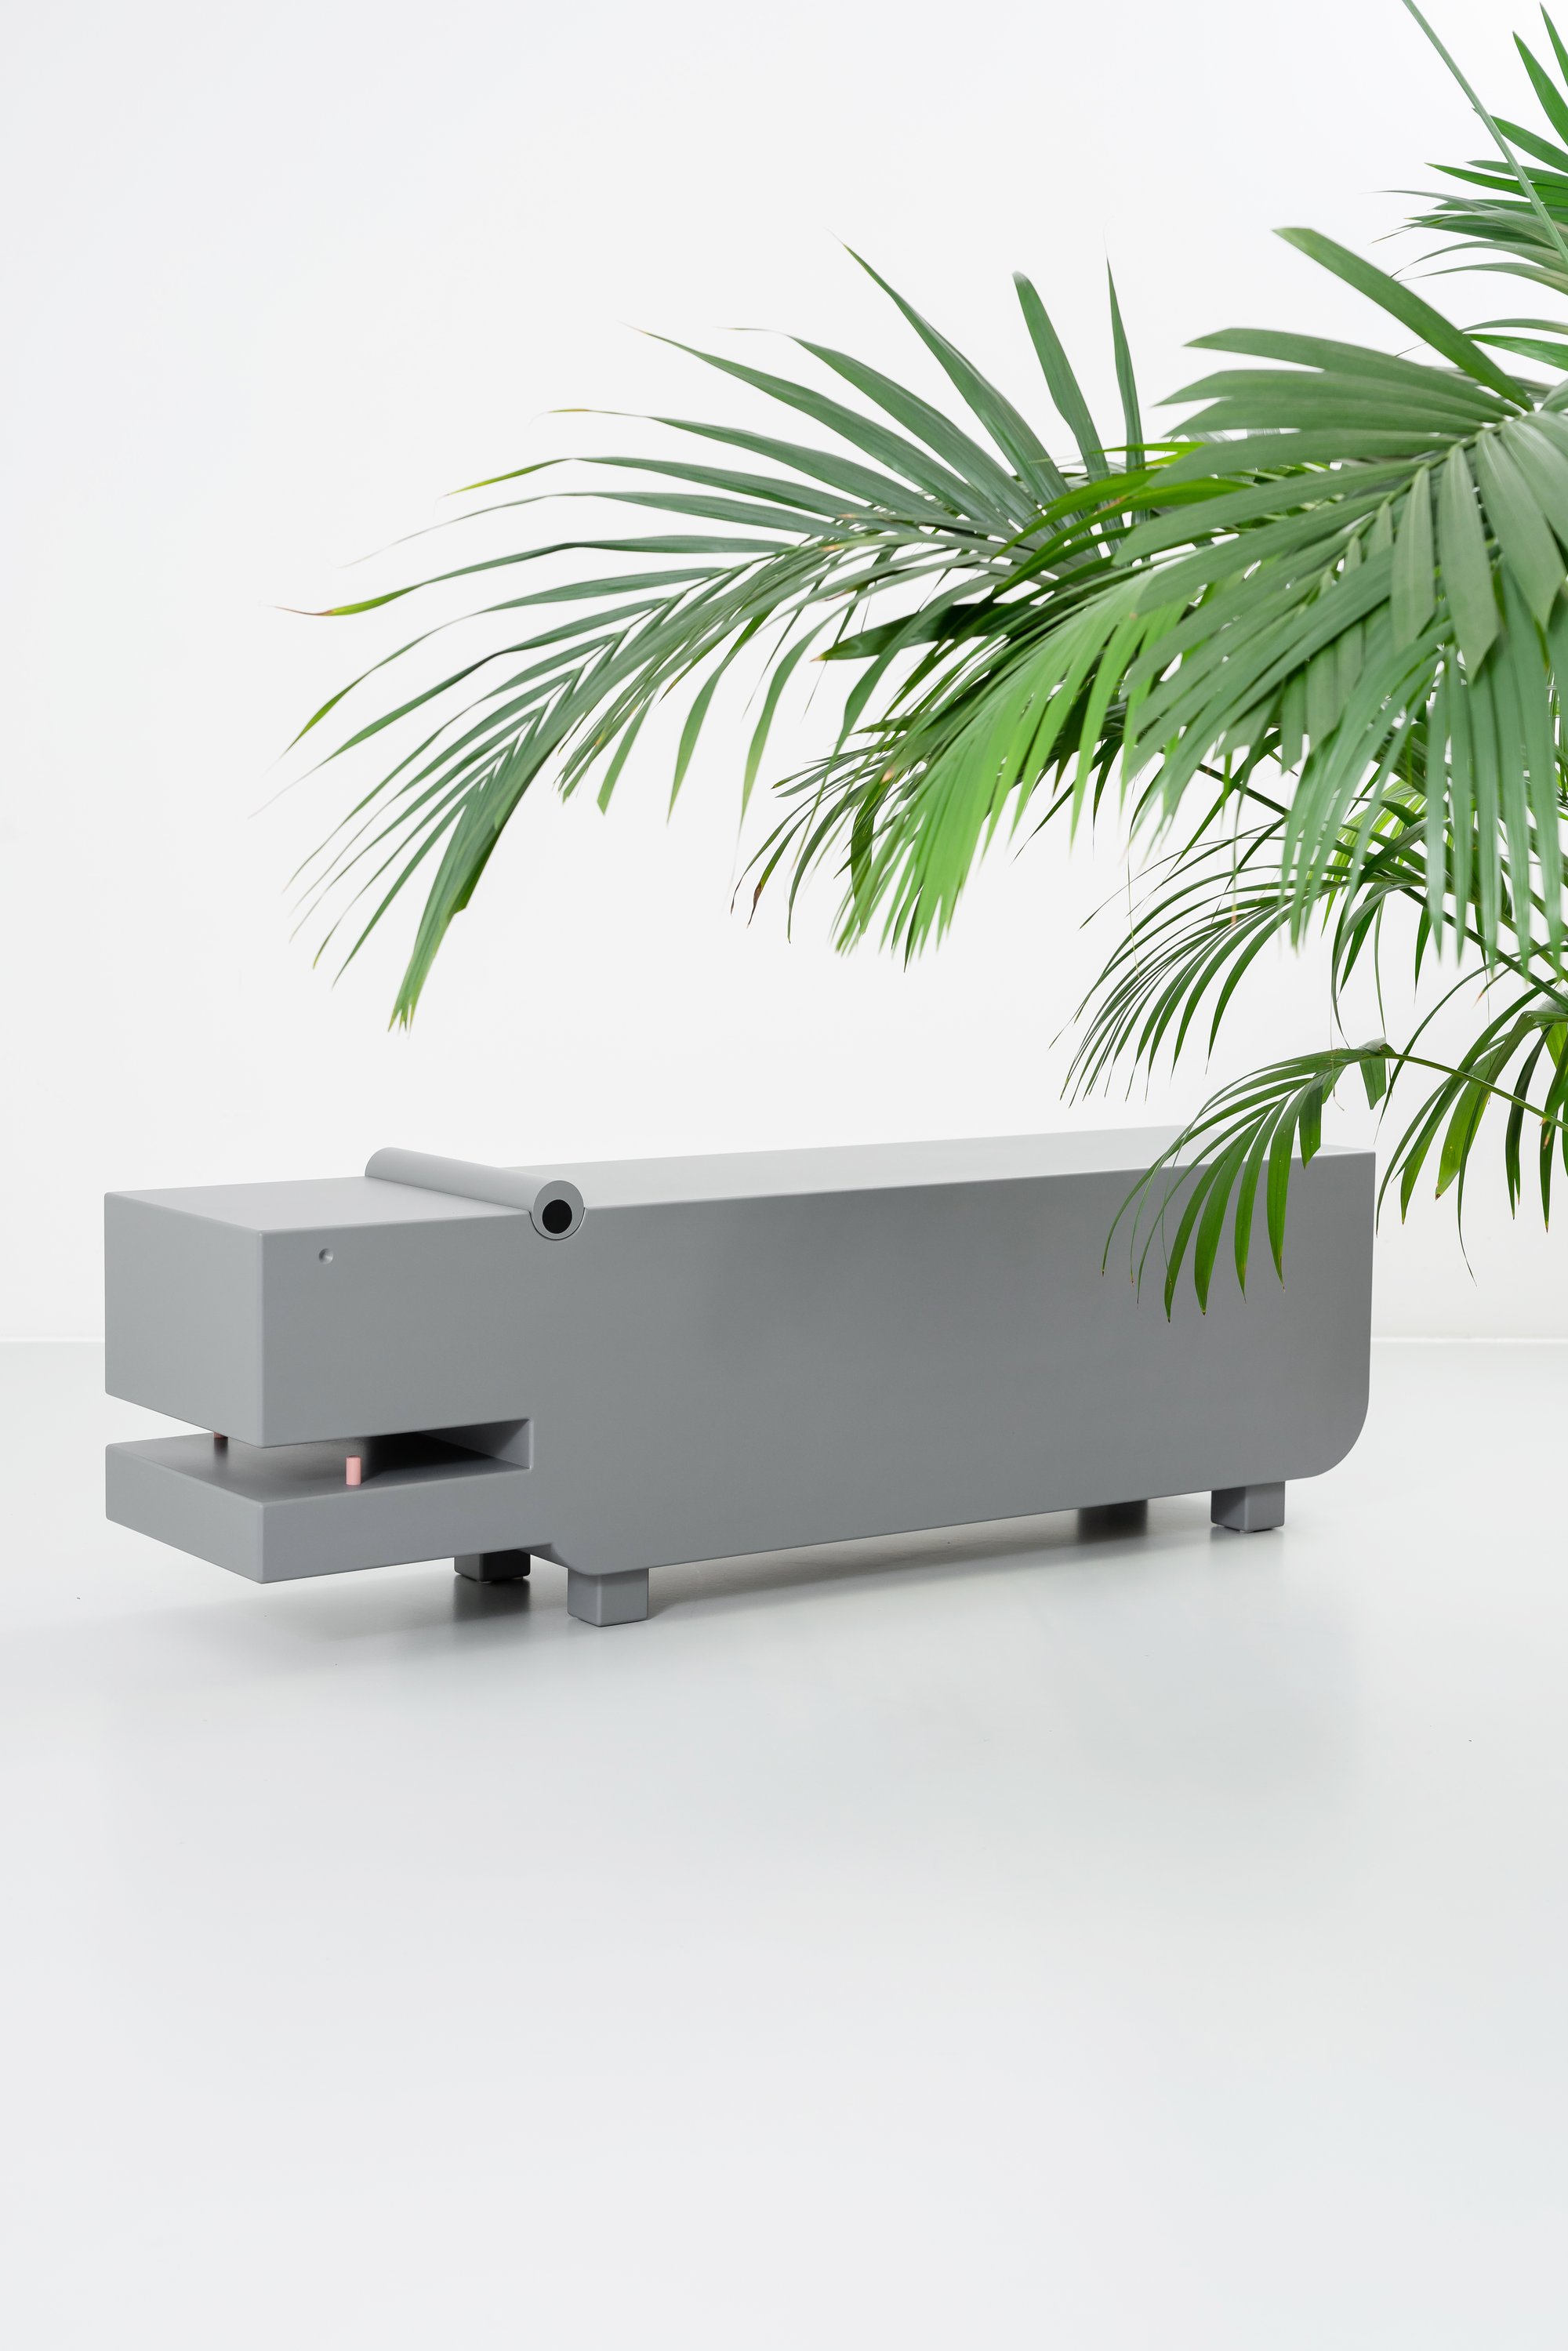 Image of "Hippo" Bench